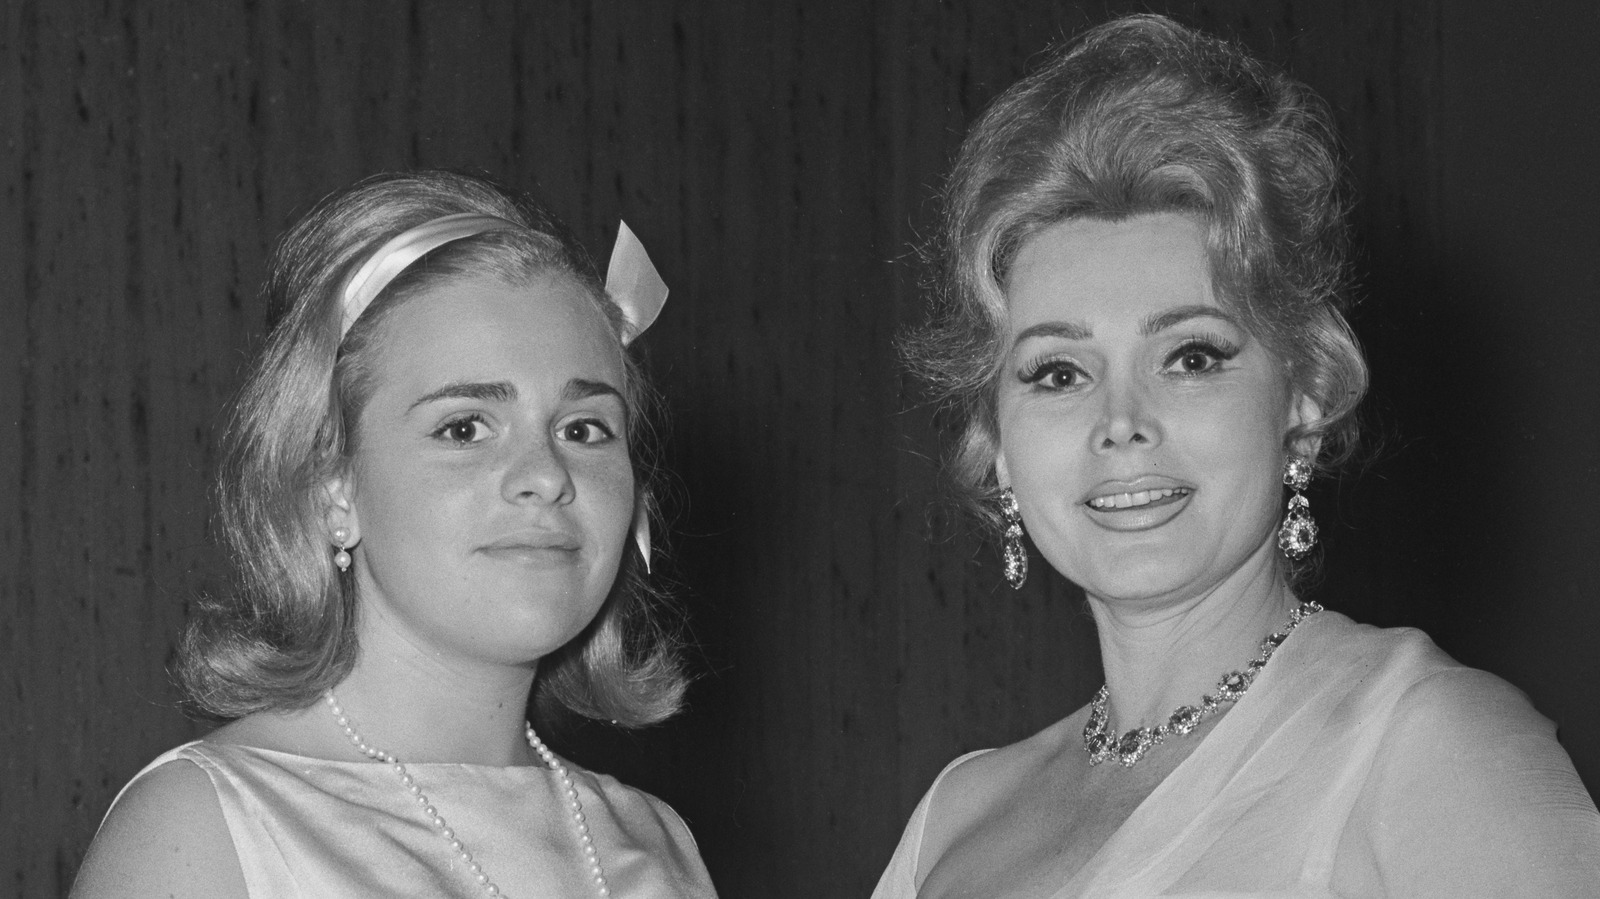 The Tragic Life And 2015 Death Of Zsa Zsa Gabor's Only Daughter ...